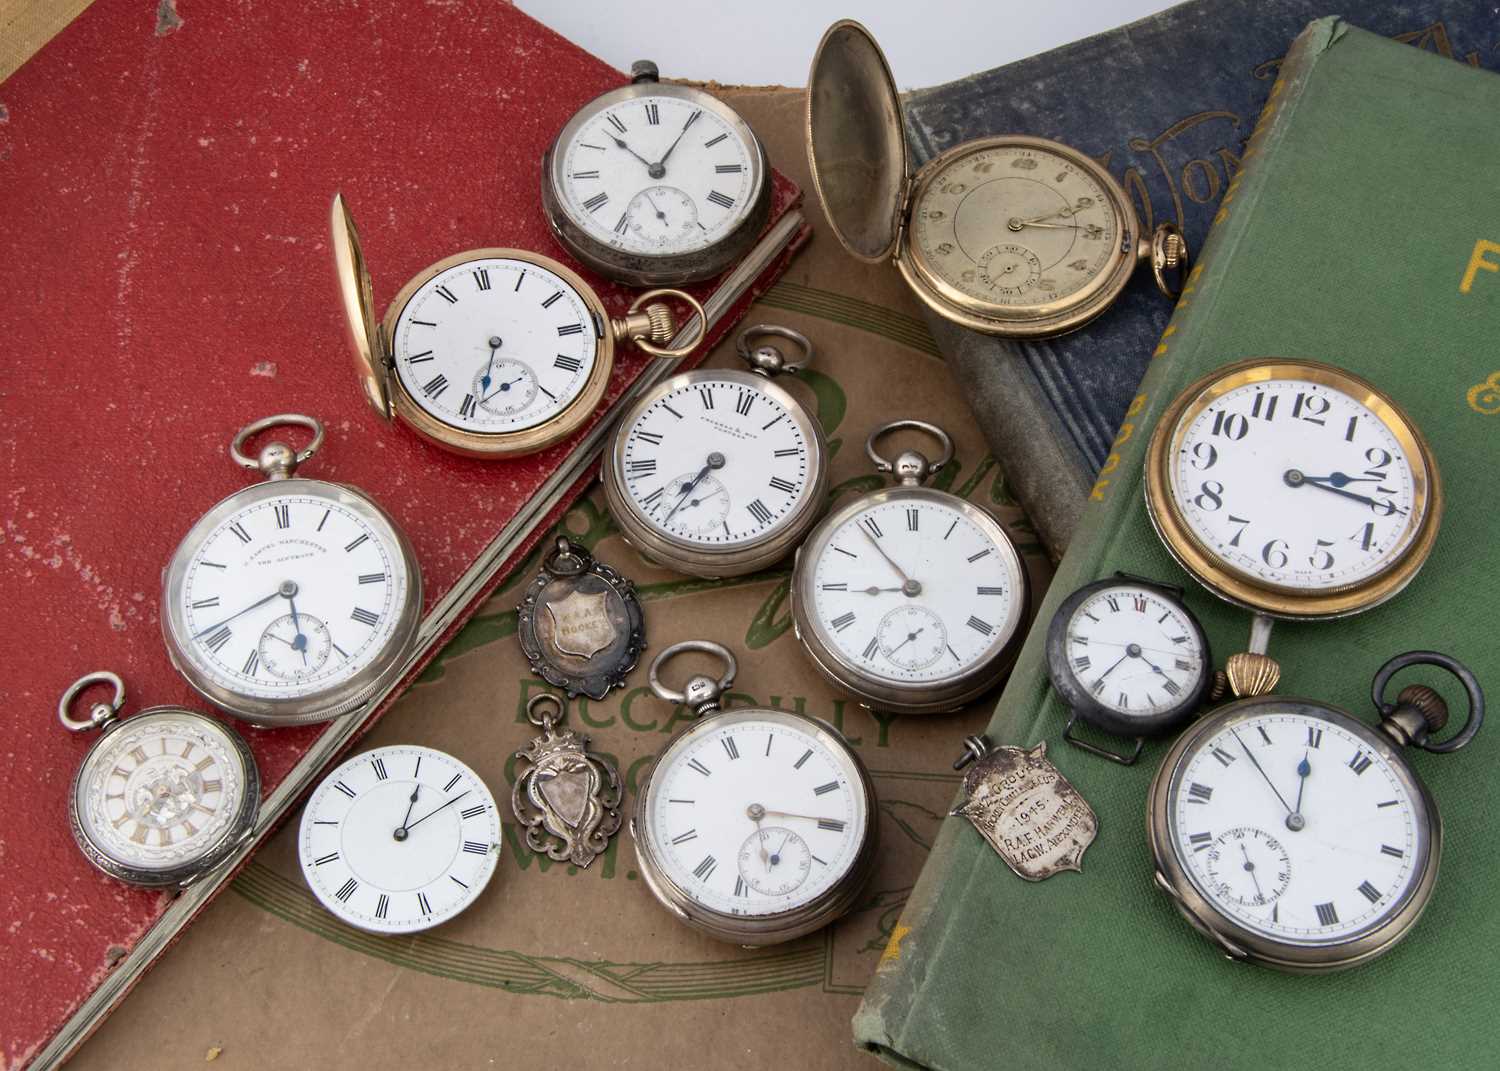 Lot 60 - A group of pocket watches and other related items